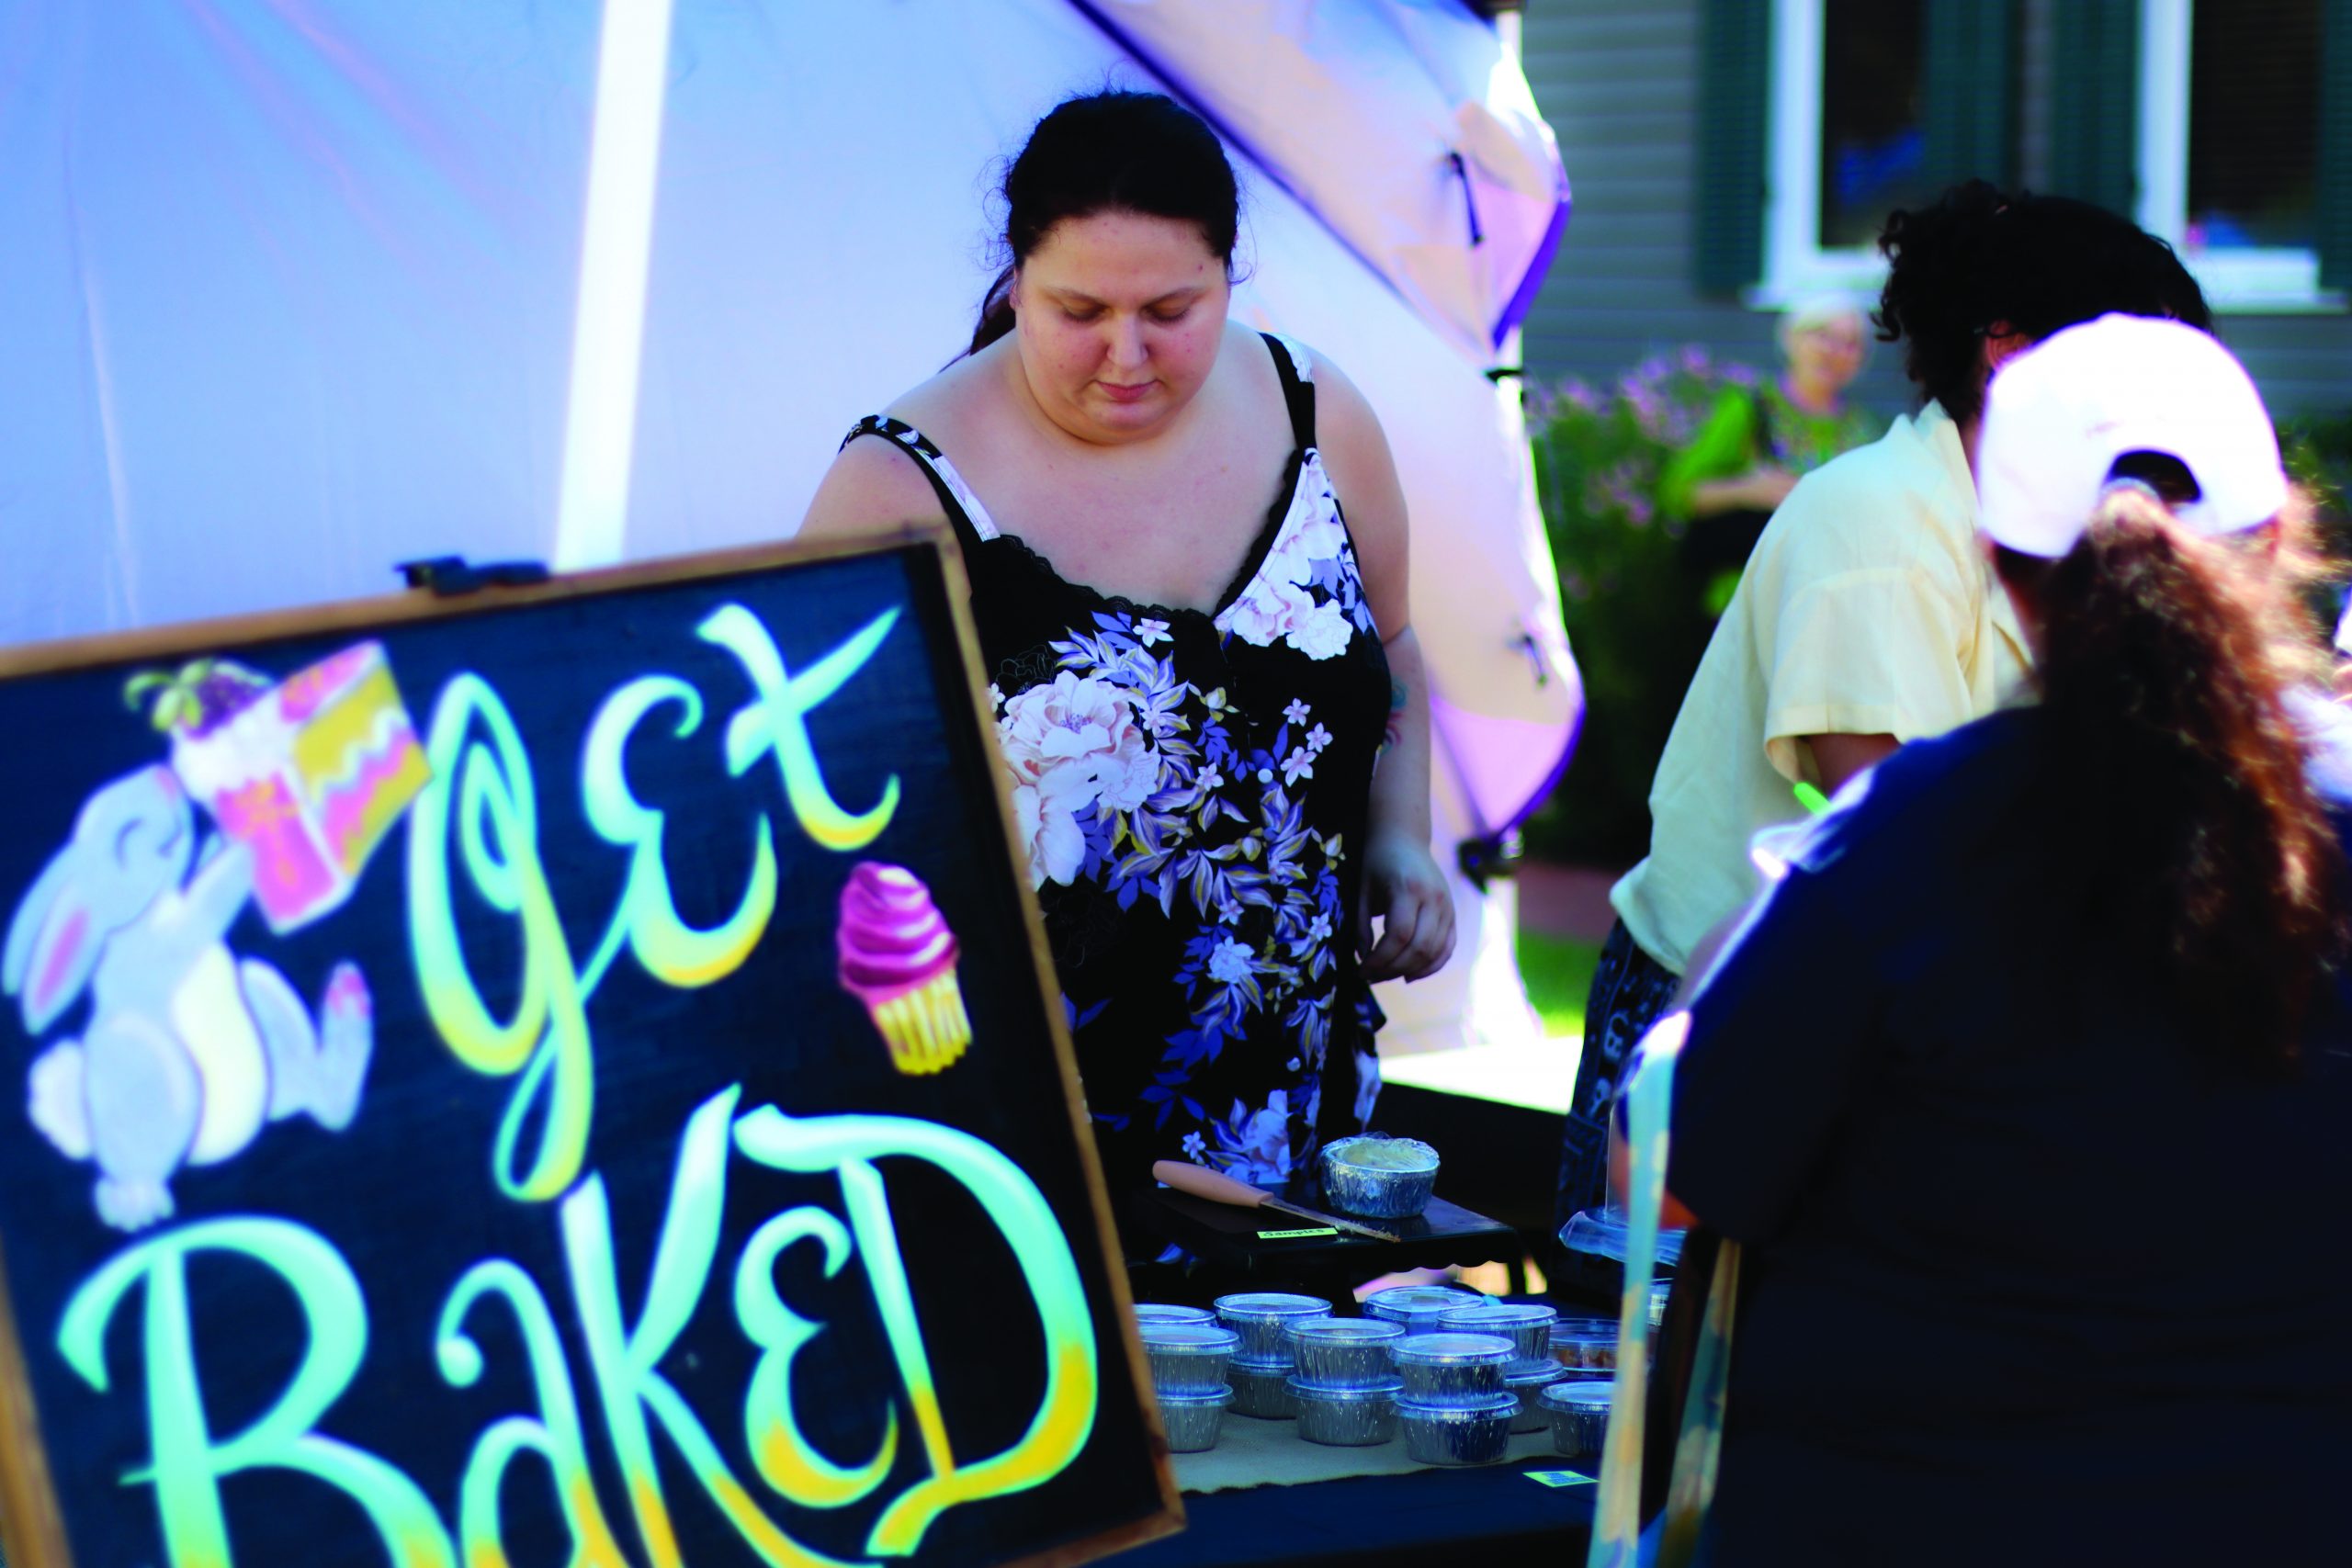 A bakery worker tends to a table of small, cup shaped baked goods. A large sign with the name "Get Baked" in the foreground.